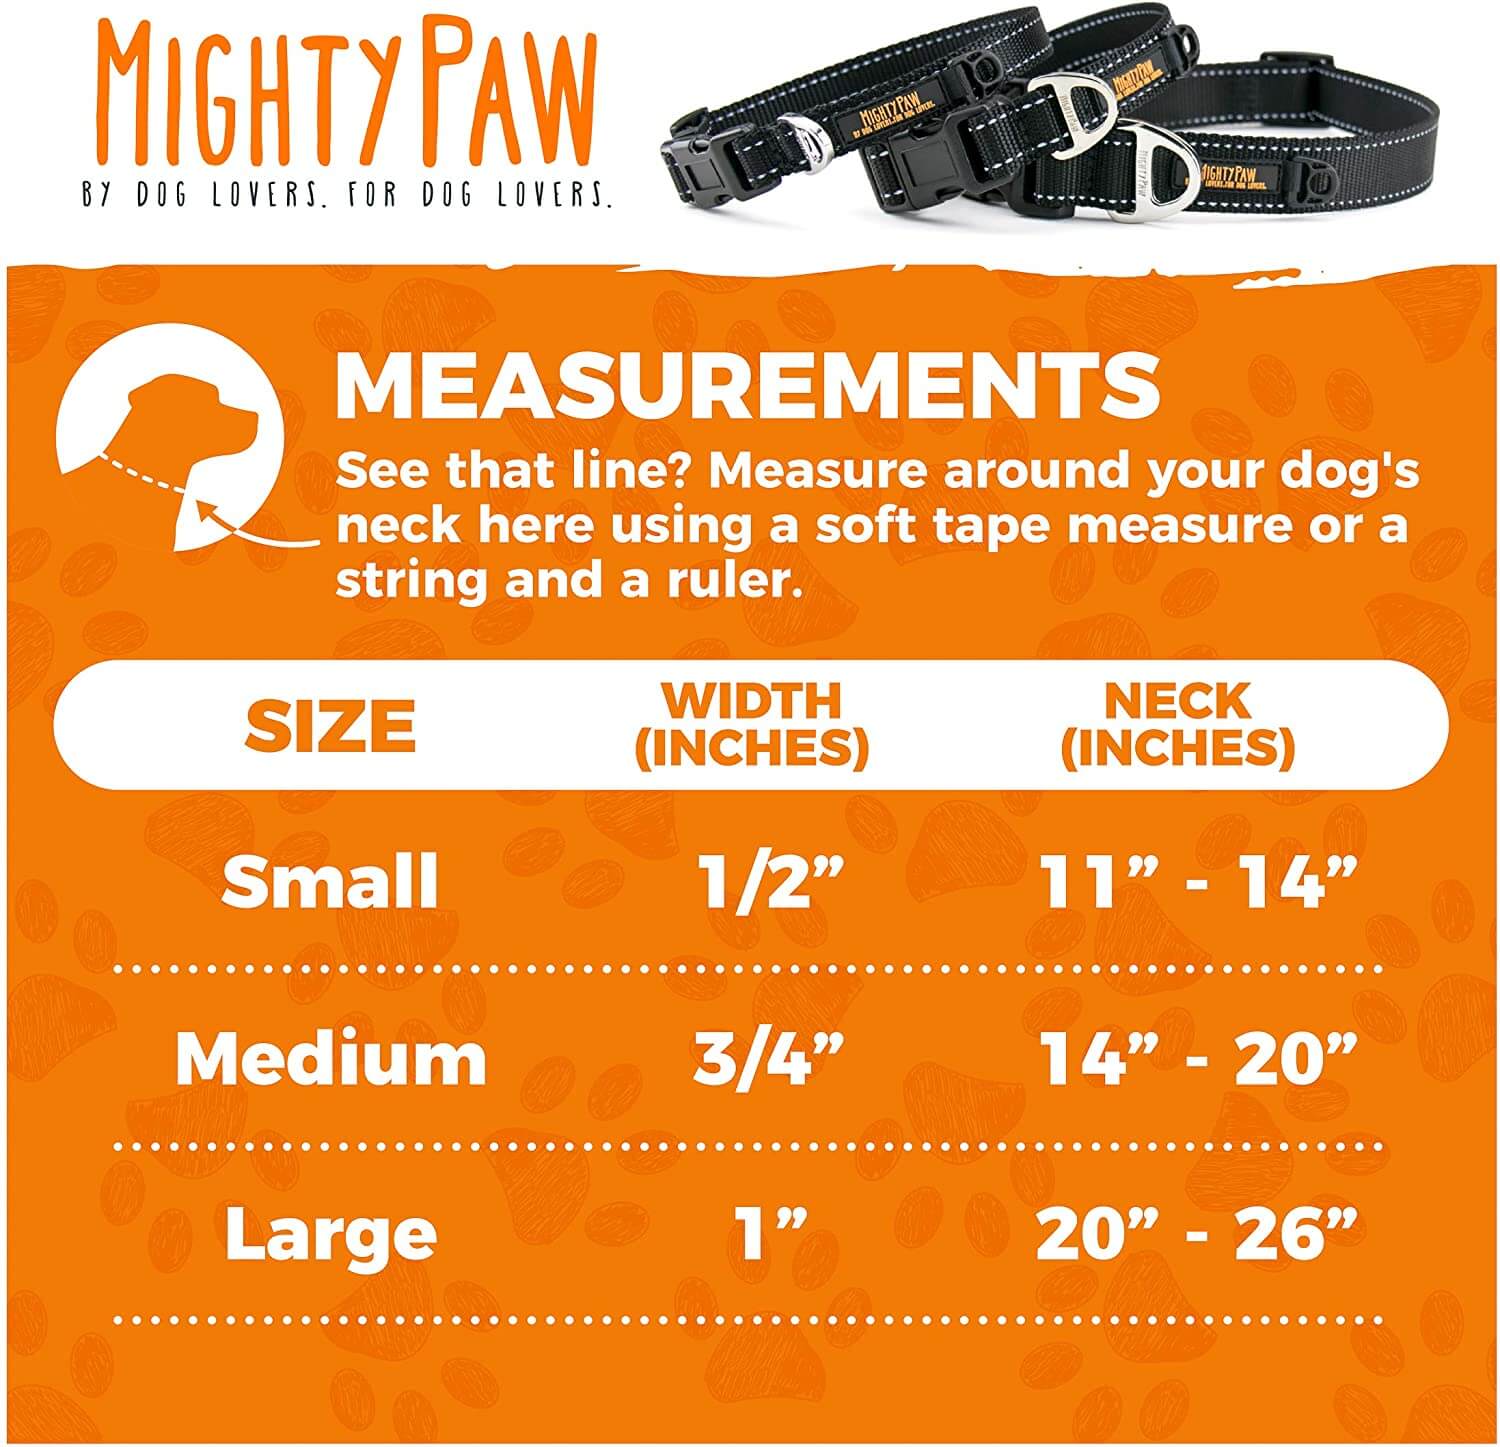 Mighty Paw Reflective Nylon Dog Collar for Safety